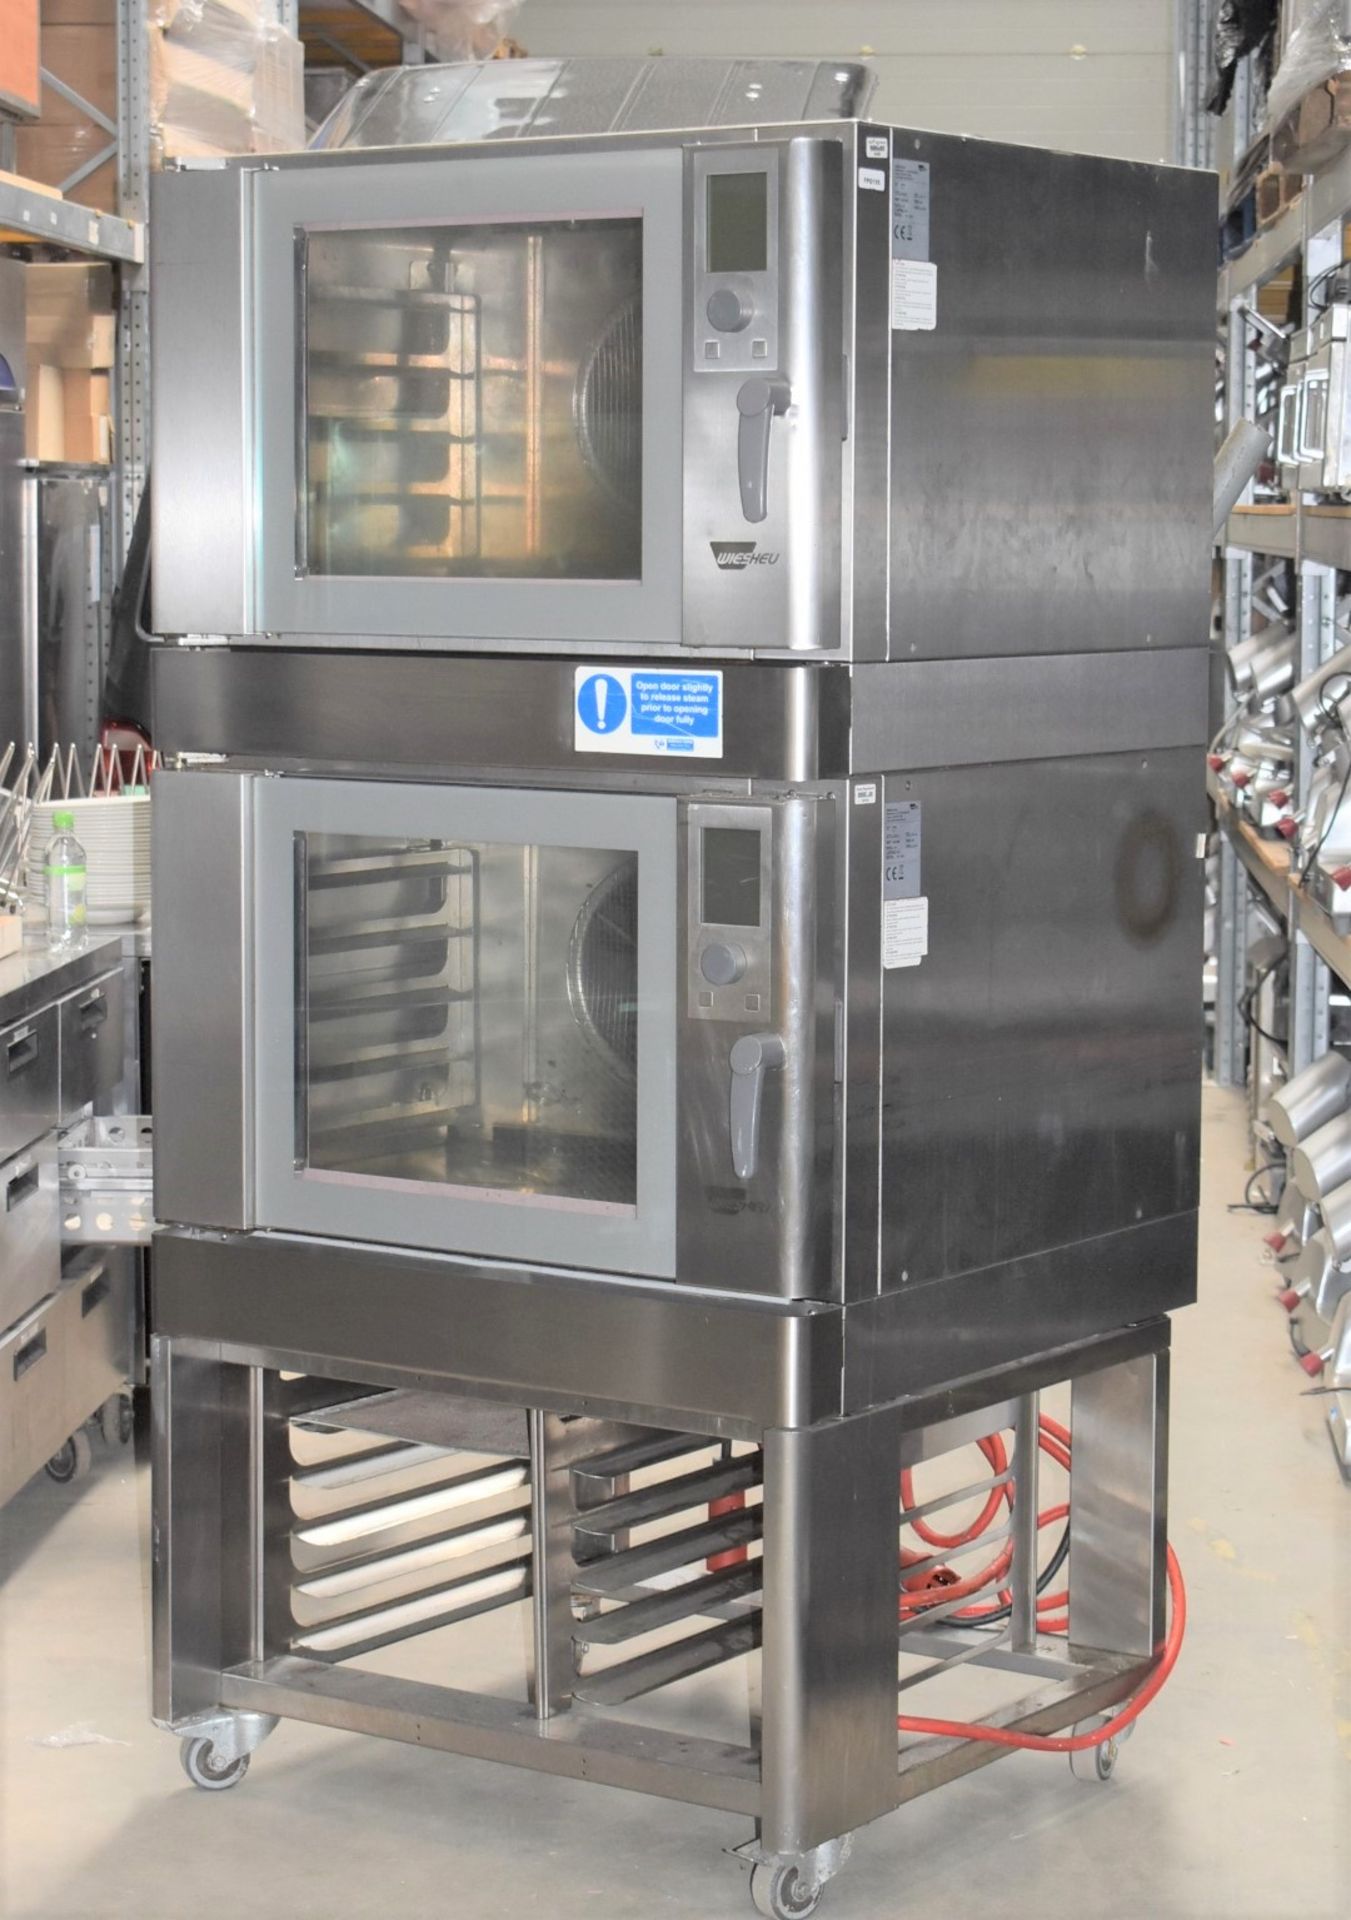 1 x Wiesheu B4-E2 Duo Commercial Convection Oven With Stainless Steel Exterior